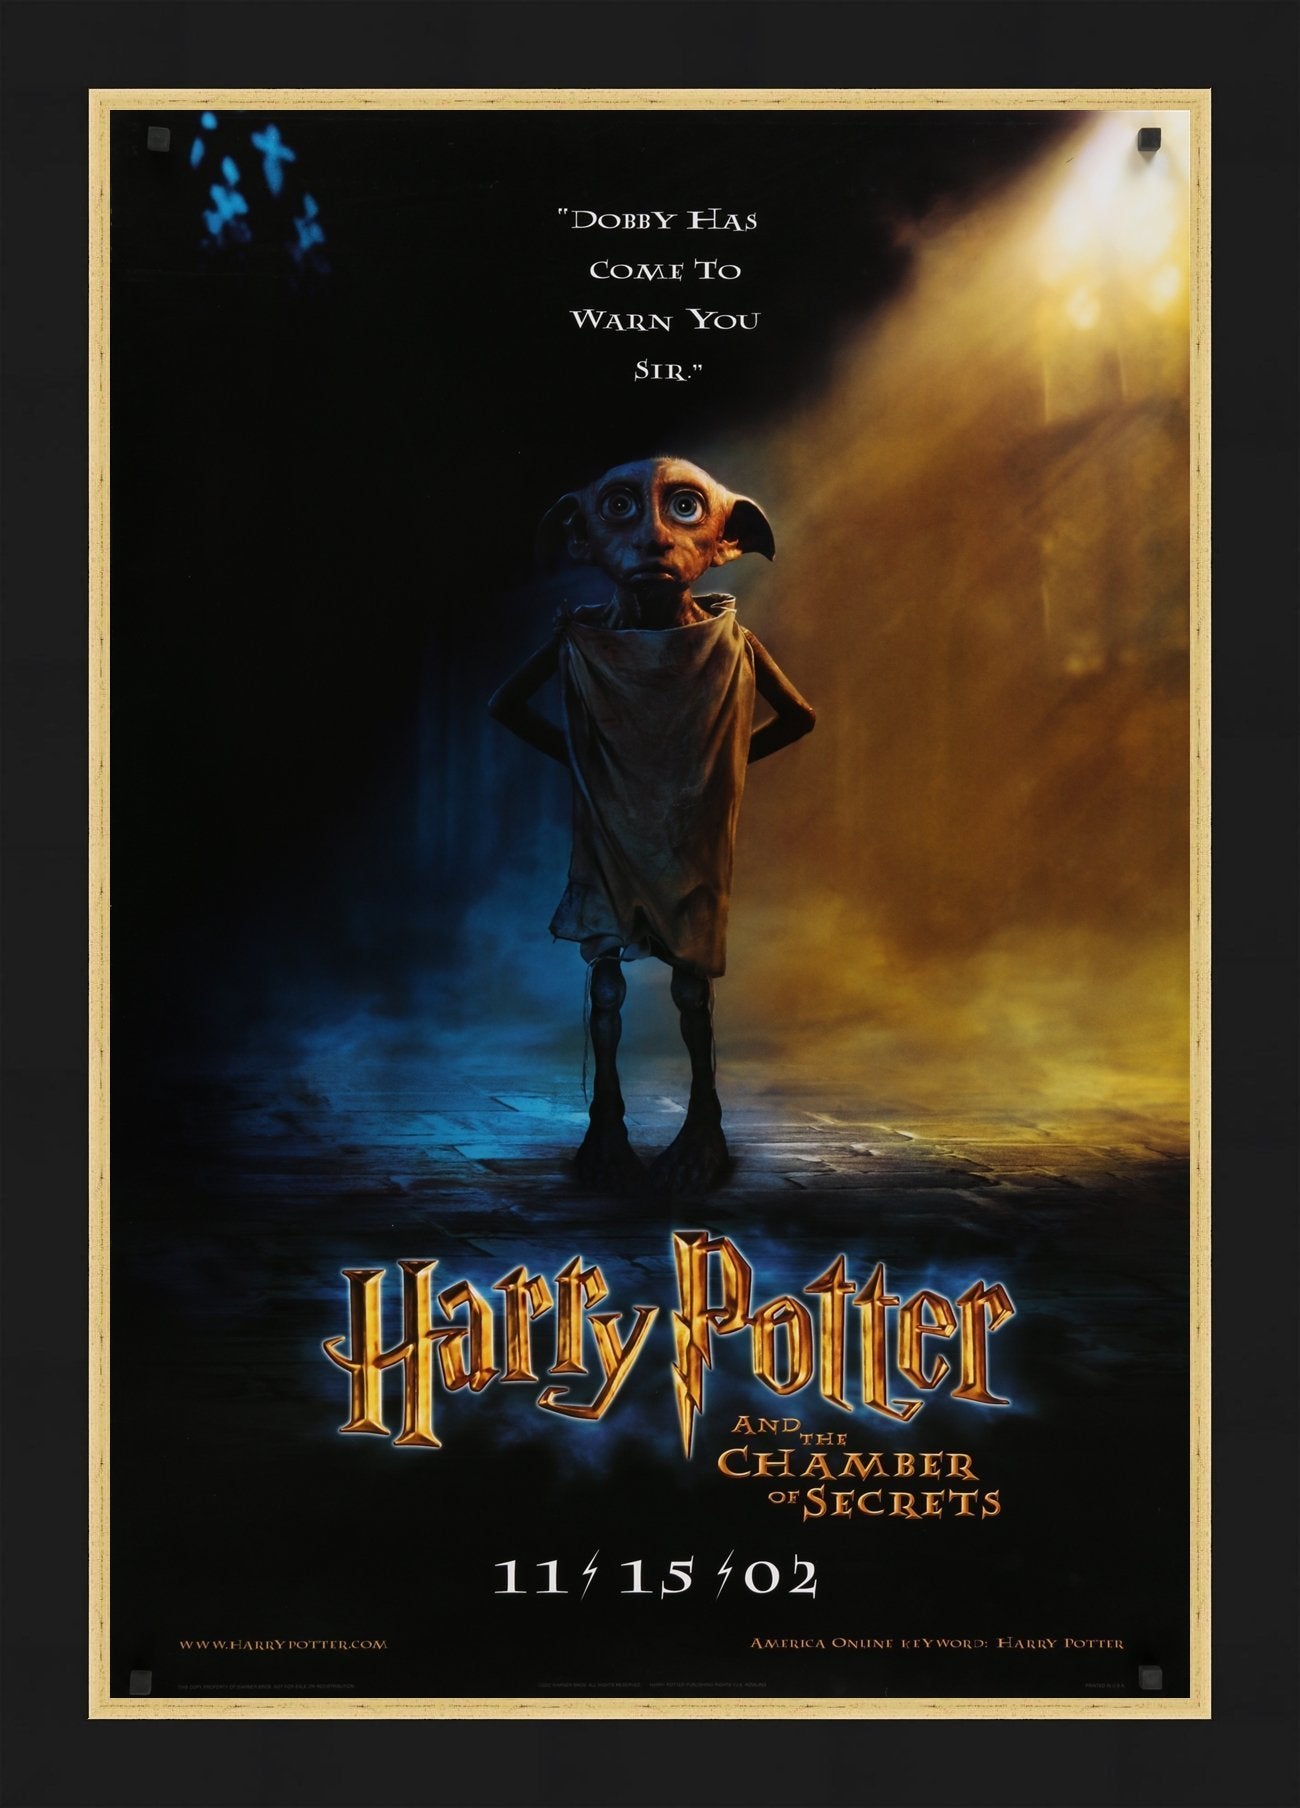 An original movie poster for HARRY POTTER and THE CHAMBER OF SECRETS